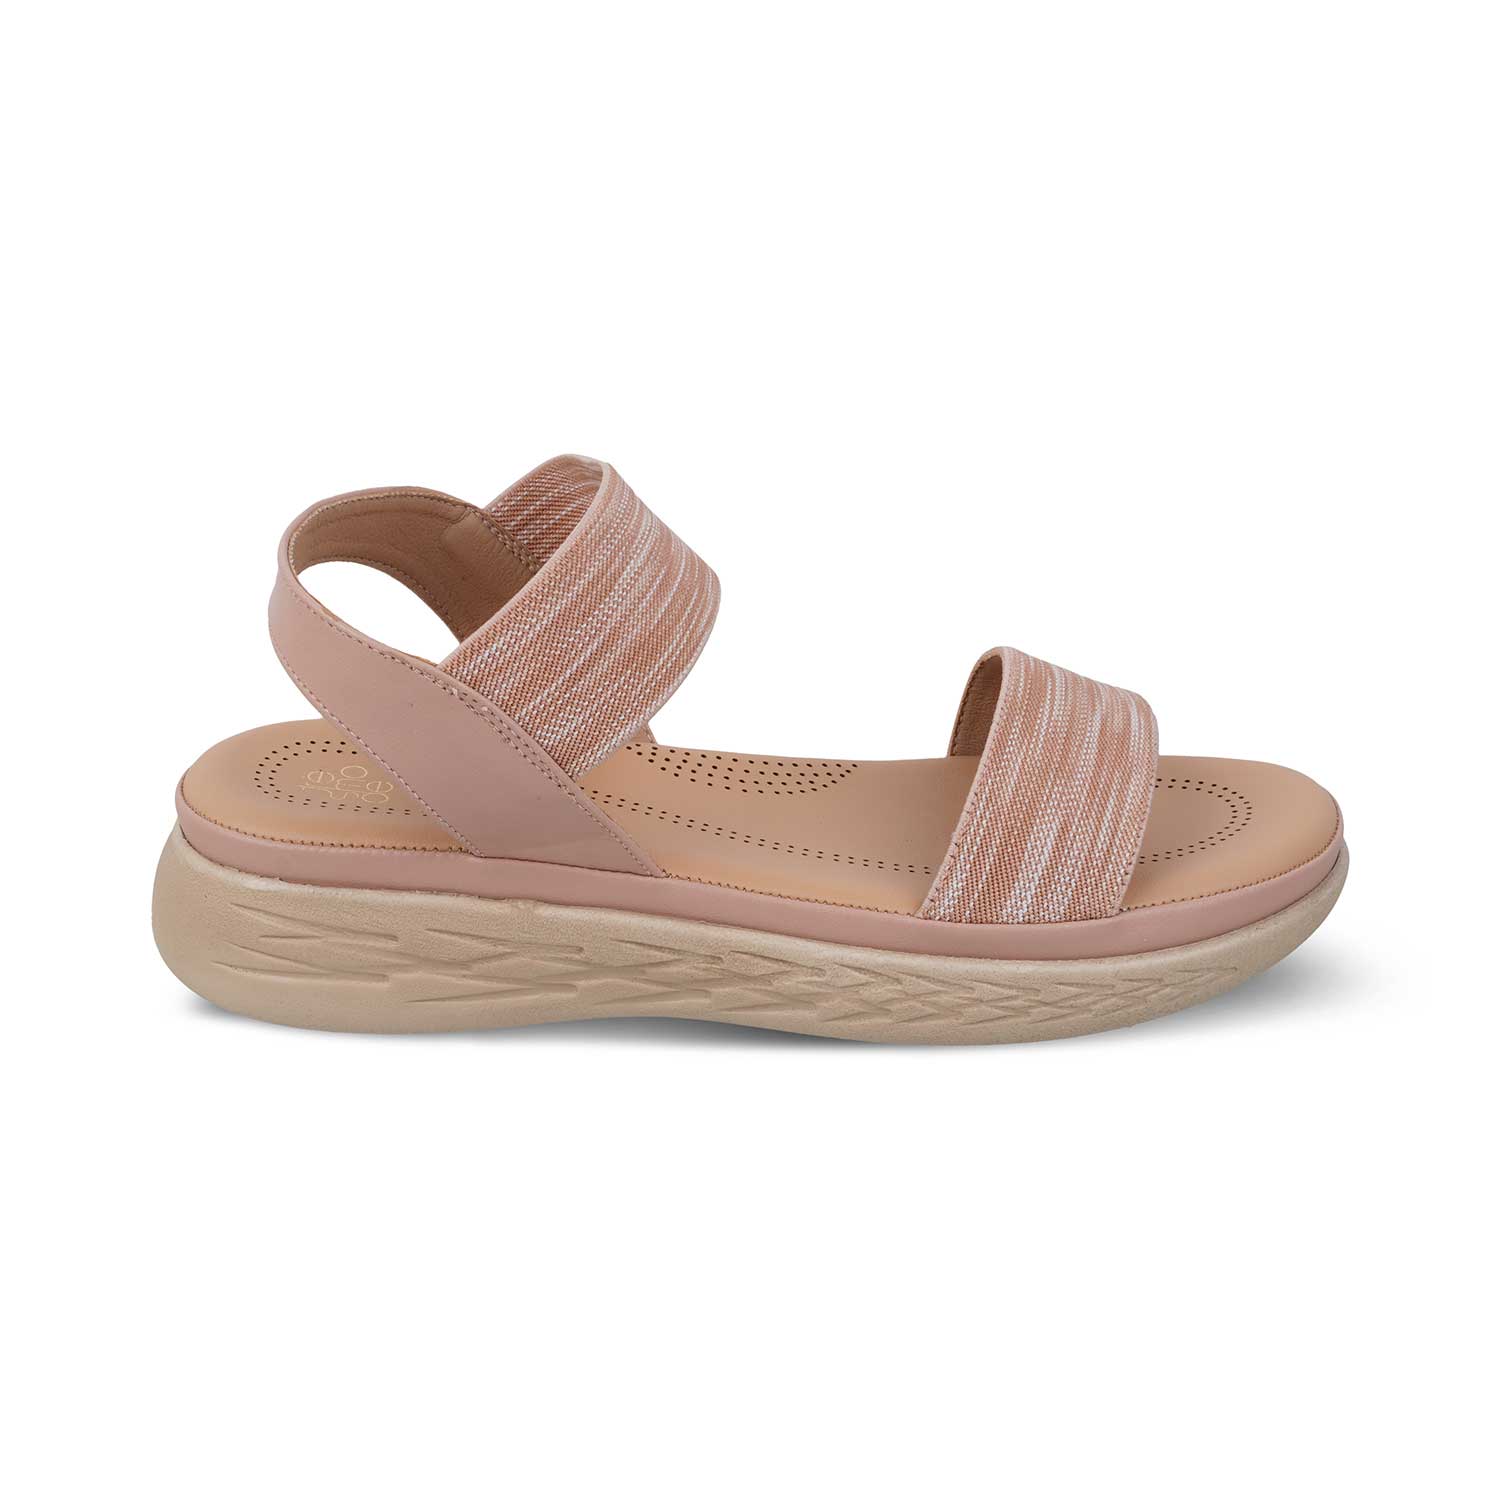 The Hintle Pink Women's Casual Wedge Sandals Tresmode